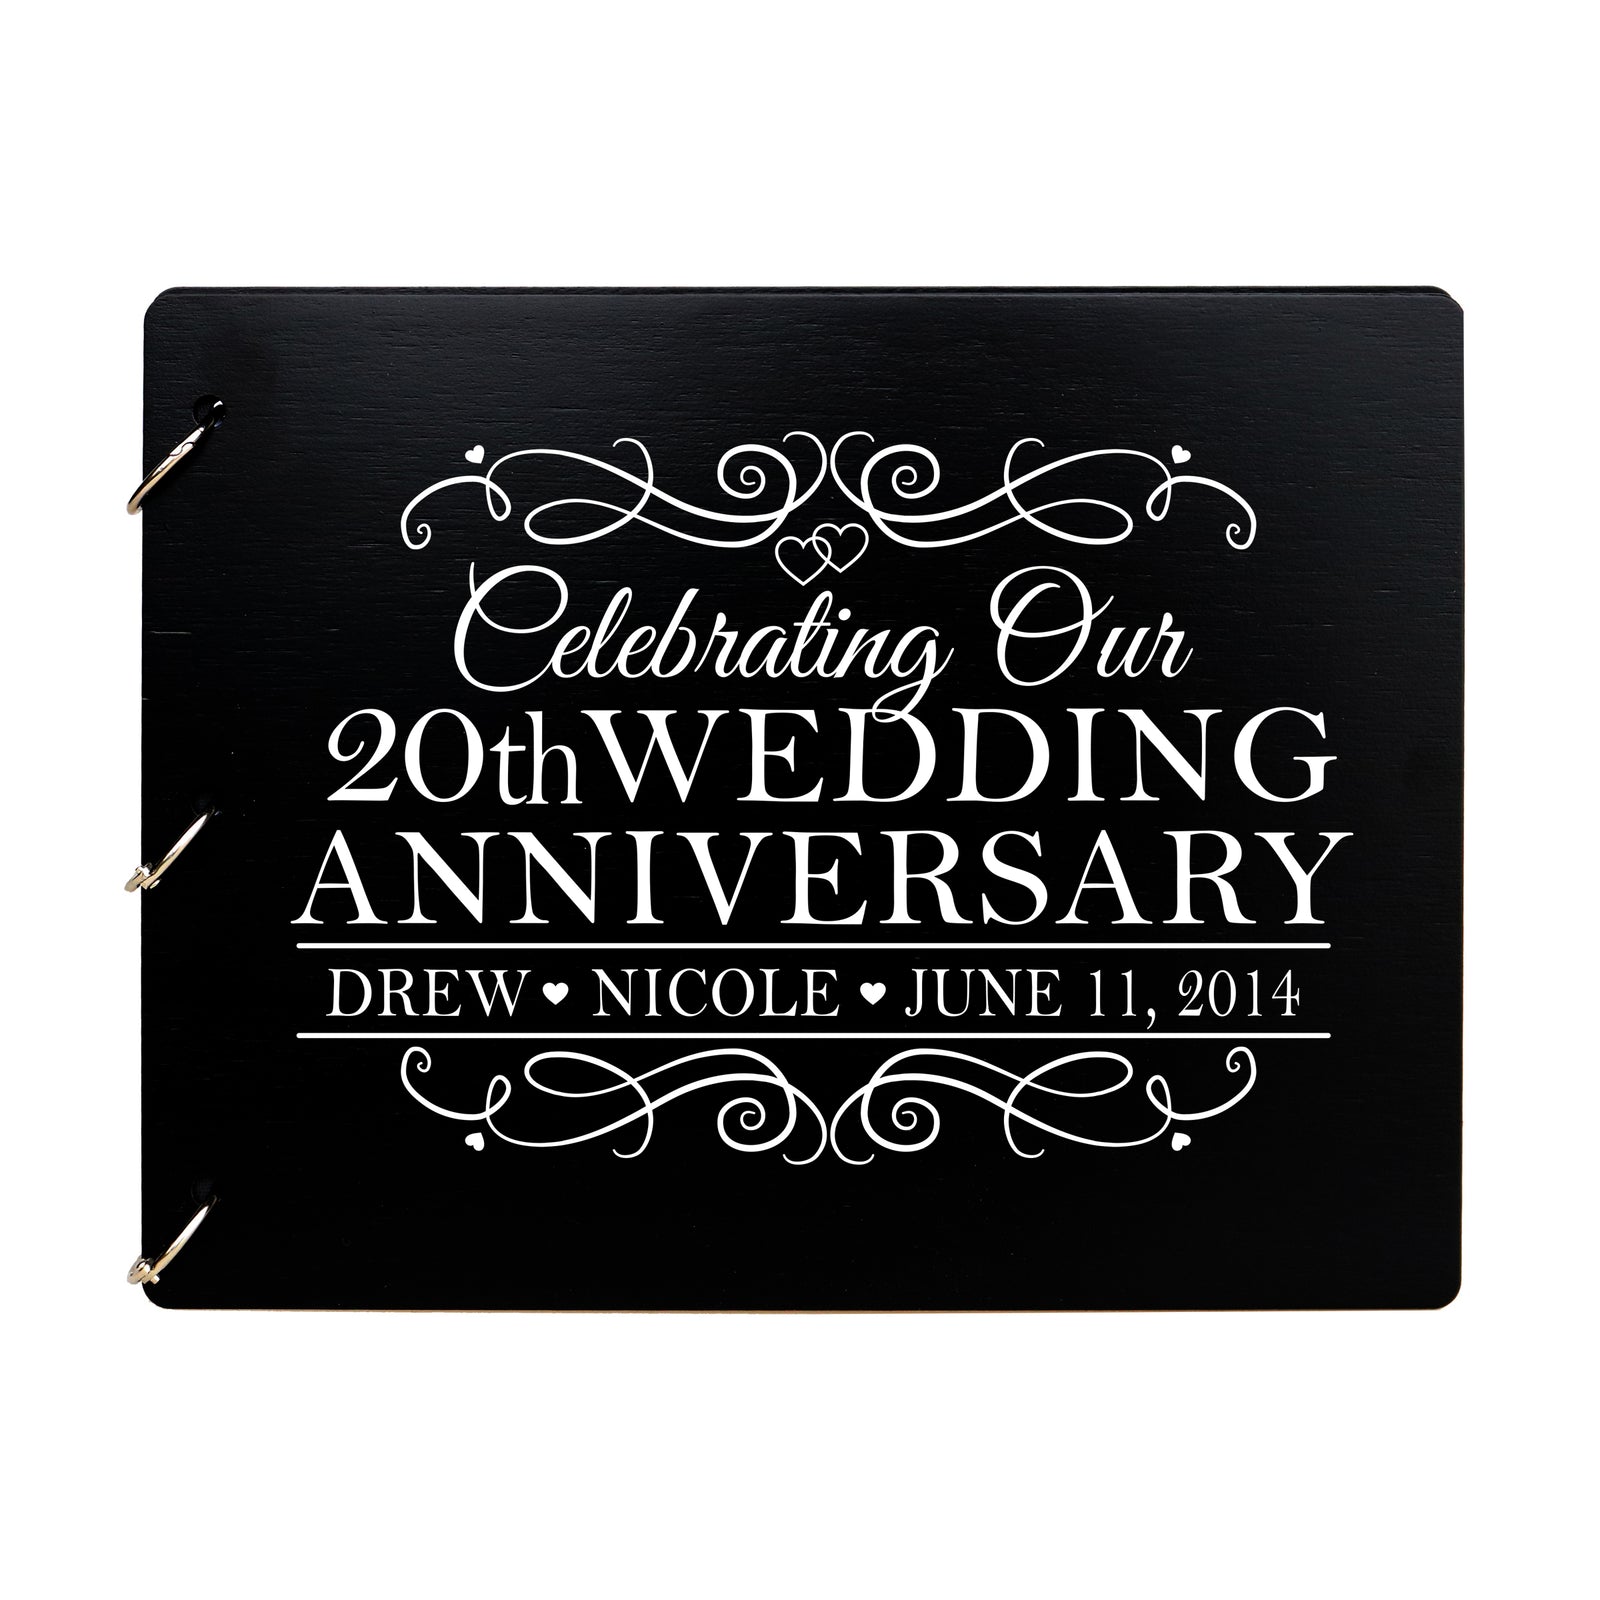 LifeSong Milestones Personalized Guestbook Sign for 20th Wedding Anniversary Gift